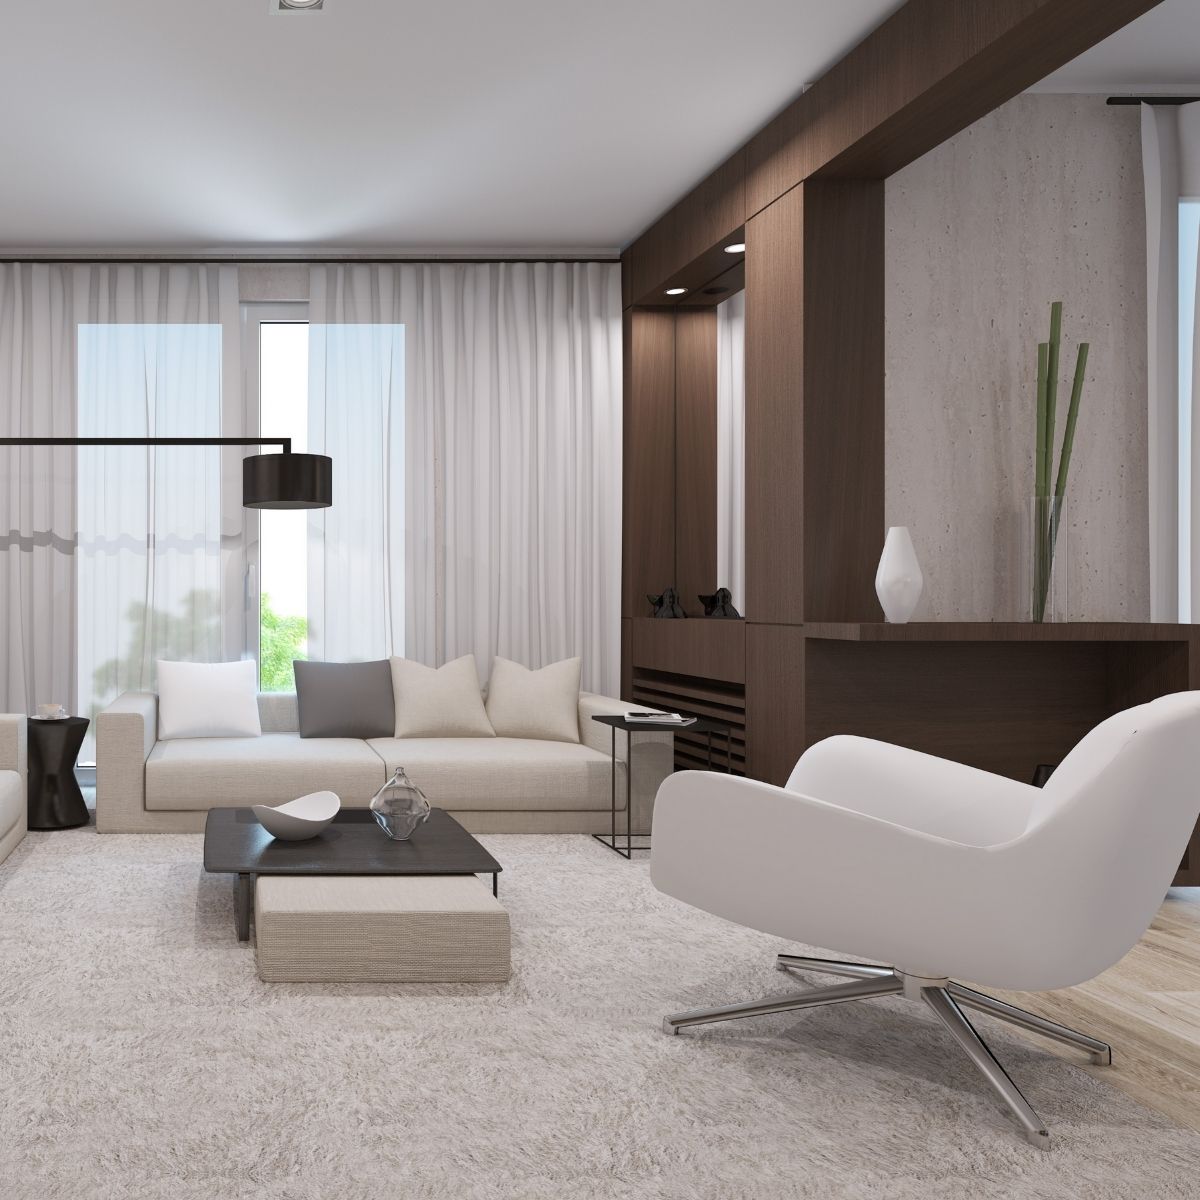 A clean living room with white modern furniture